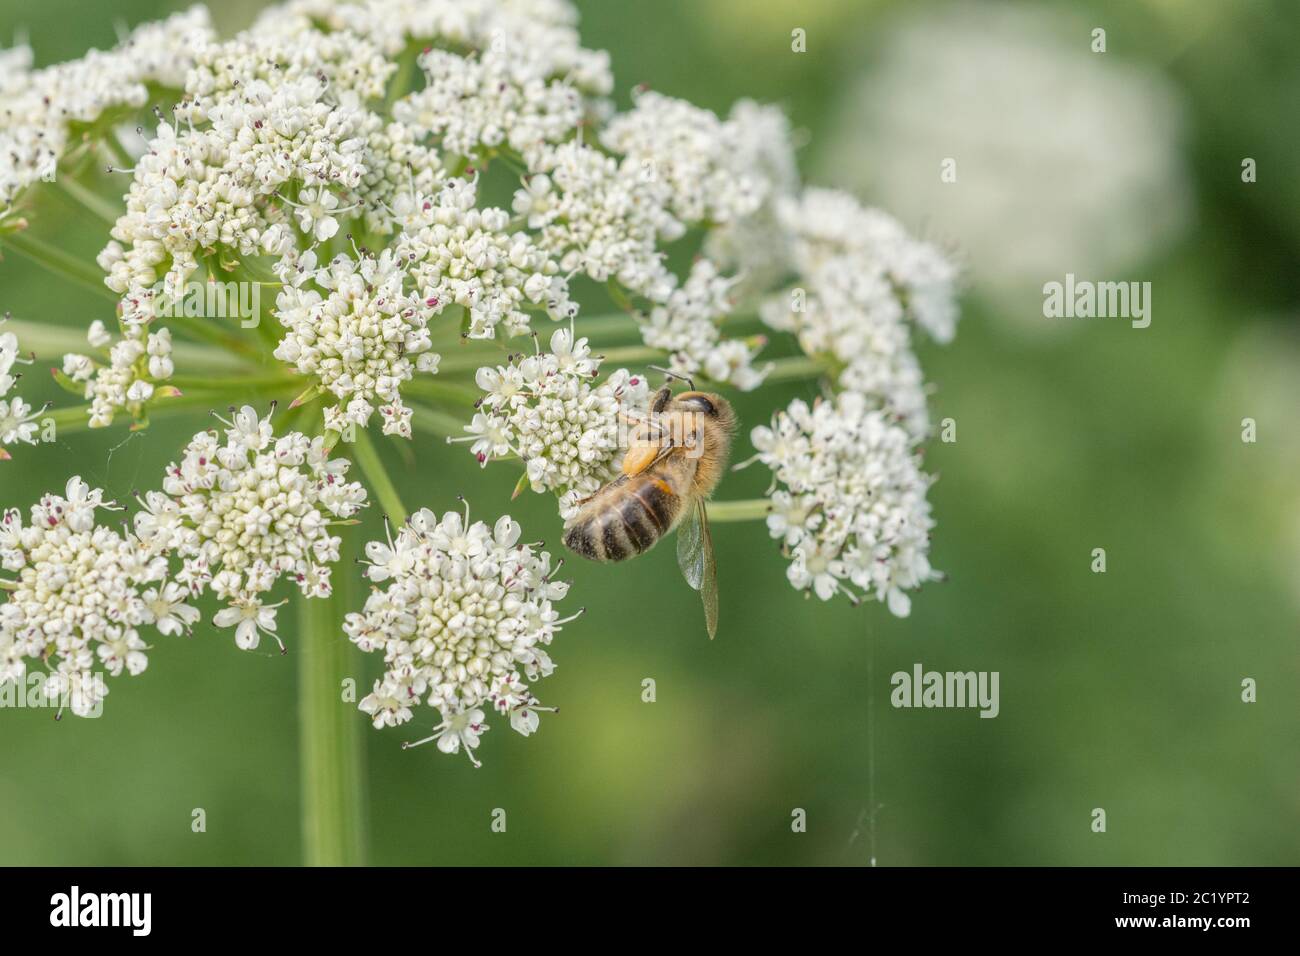 Worker Honeybee / Apis mellifera foraging and collecting pollen among flowers of Water Dropwort / Oenanthe crocata in summer sunshine. Insects UK. Stock Photo